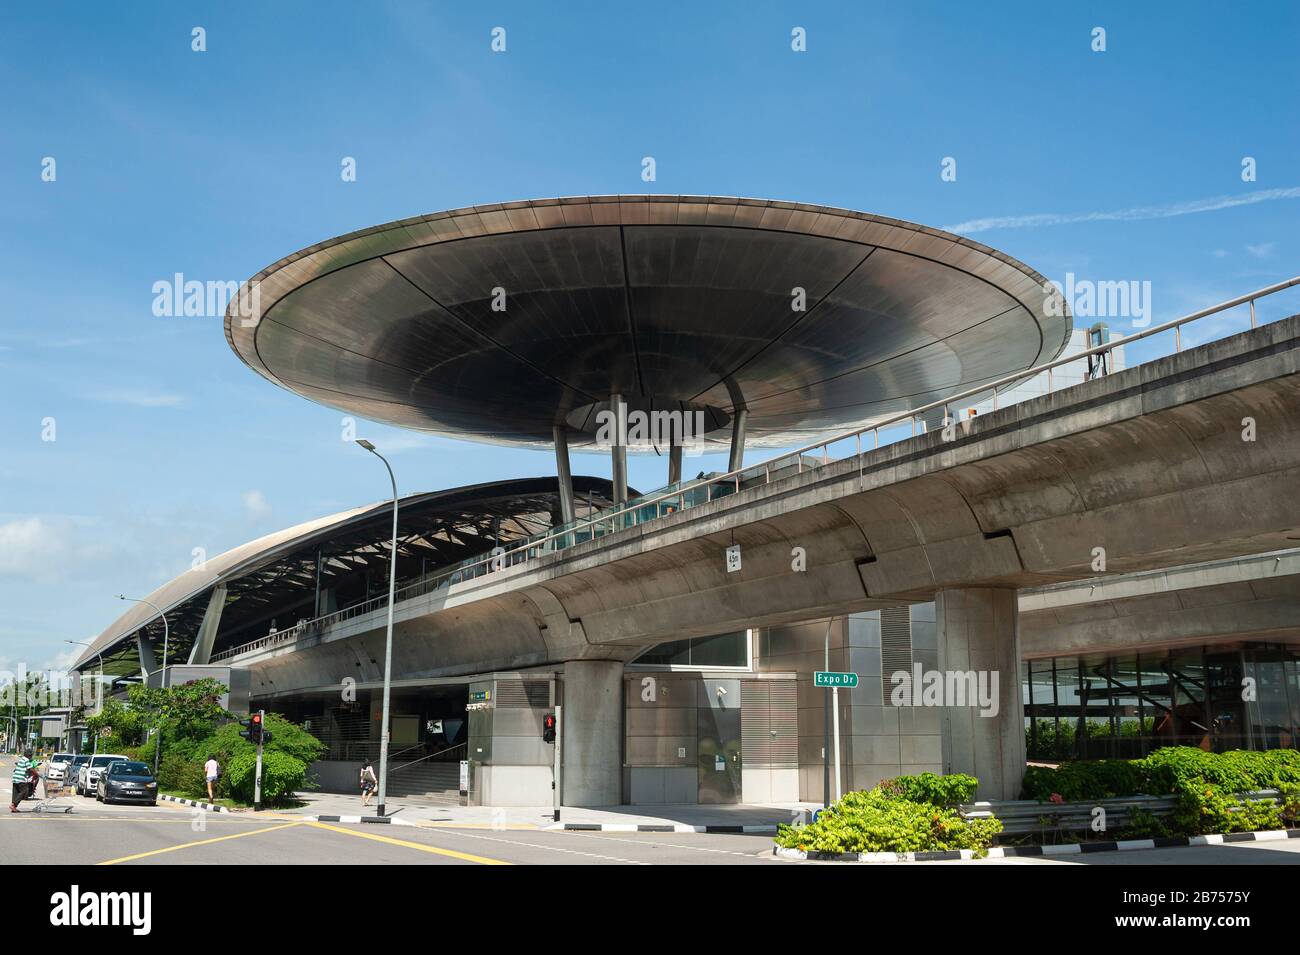 24.05.2019, Singapore, Republic of Singapore, Asia - Exterior view of the Expo stop of the MRT light rail system. The station was designed by the British architect Sir Norman Foster. [automated translation] Stock Photo